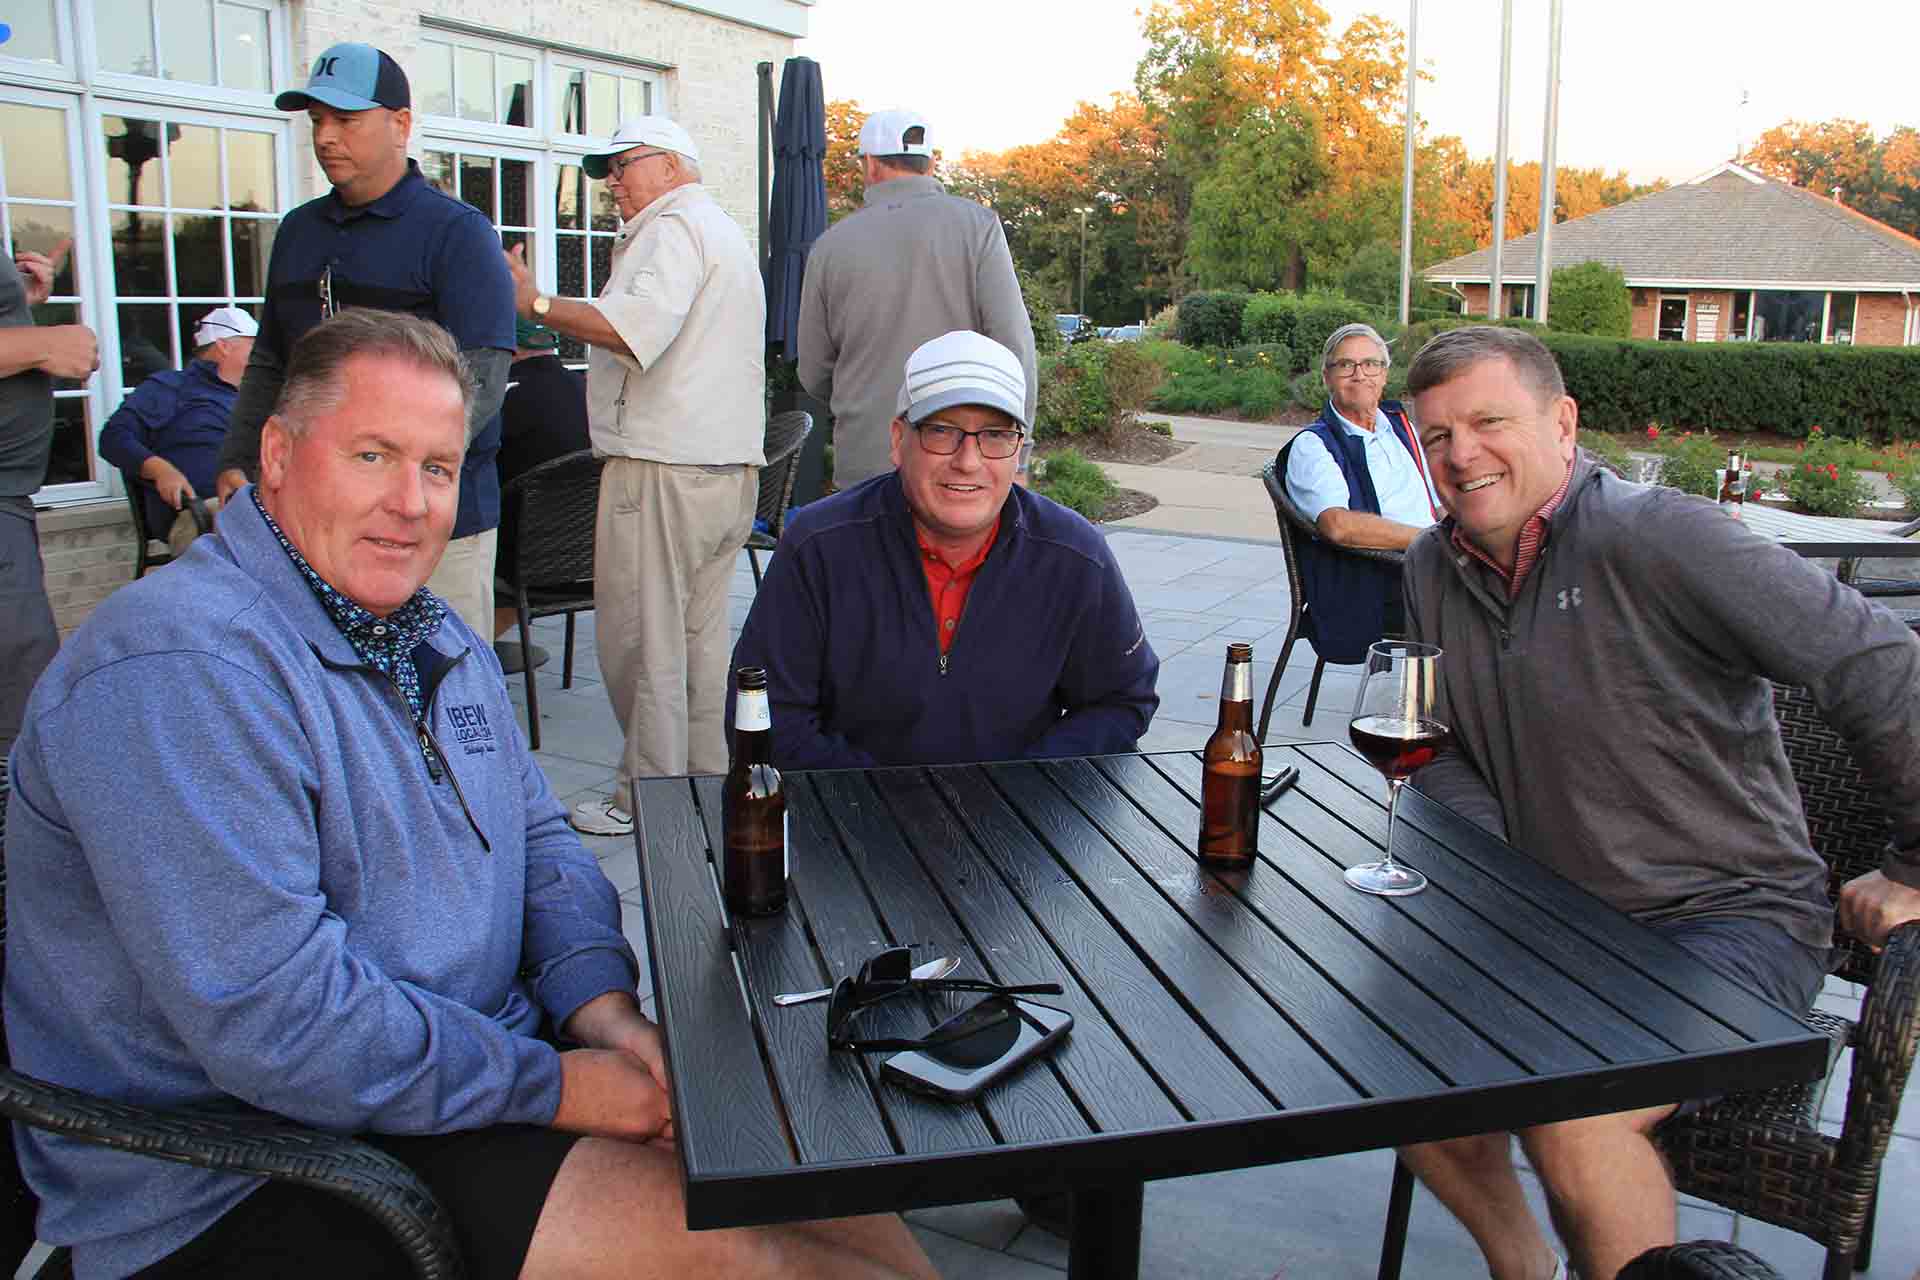 2022-Endowment-Golf-Classic-three-people-seated-smiling-for-group-photo